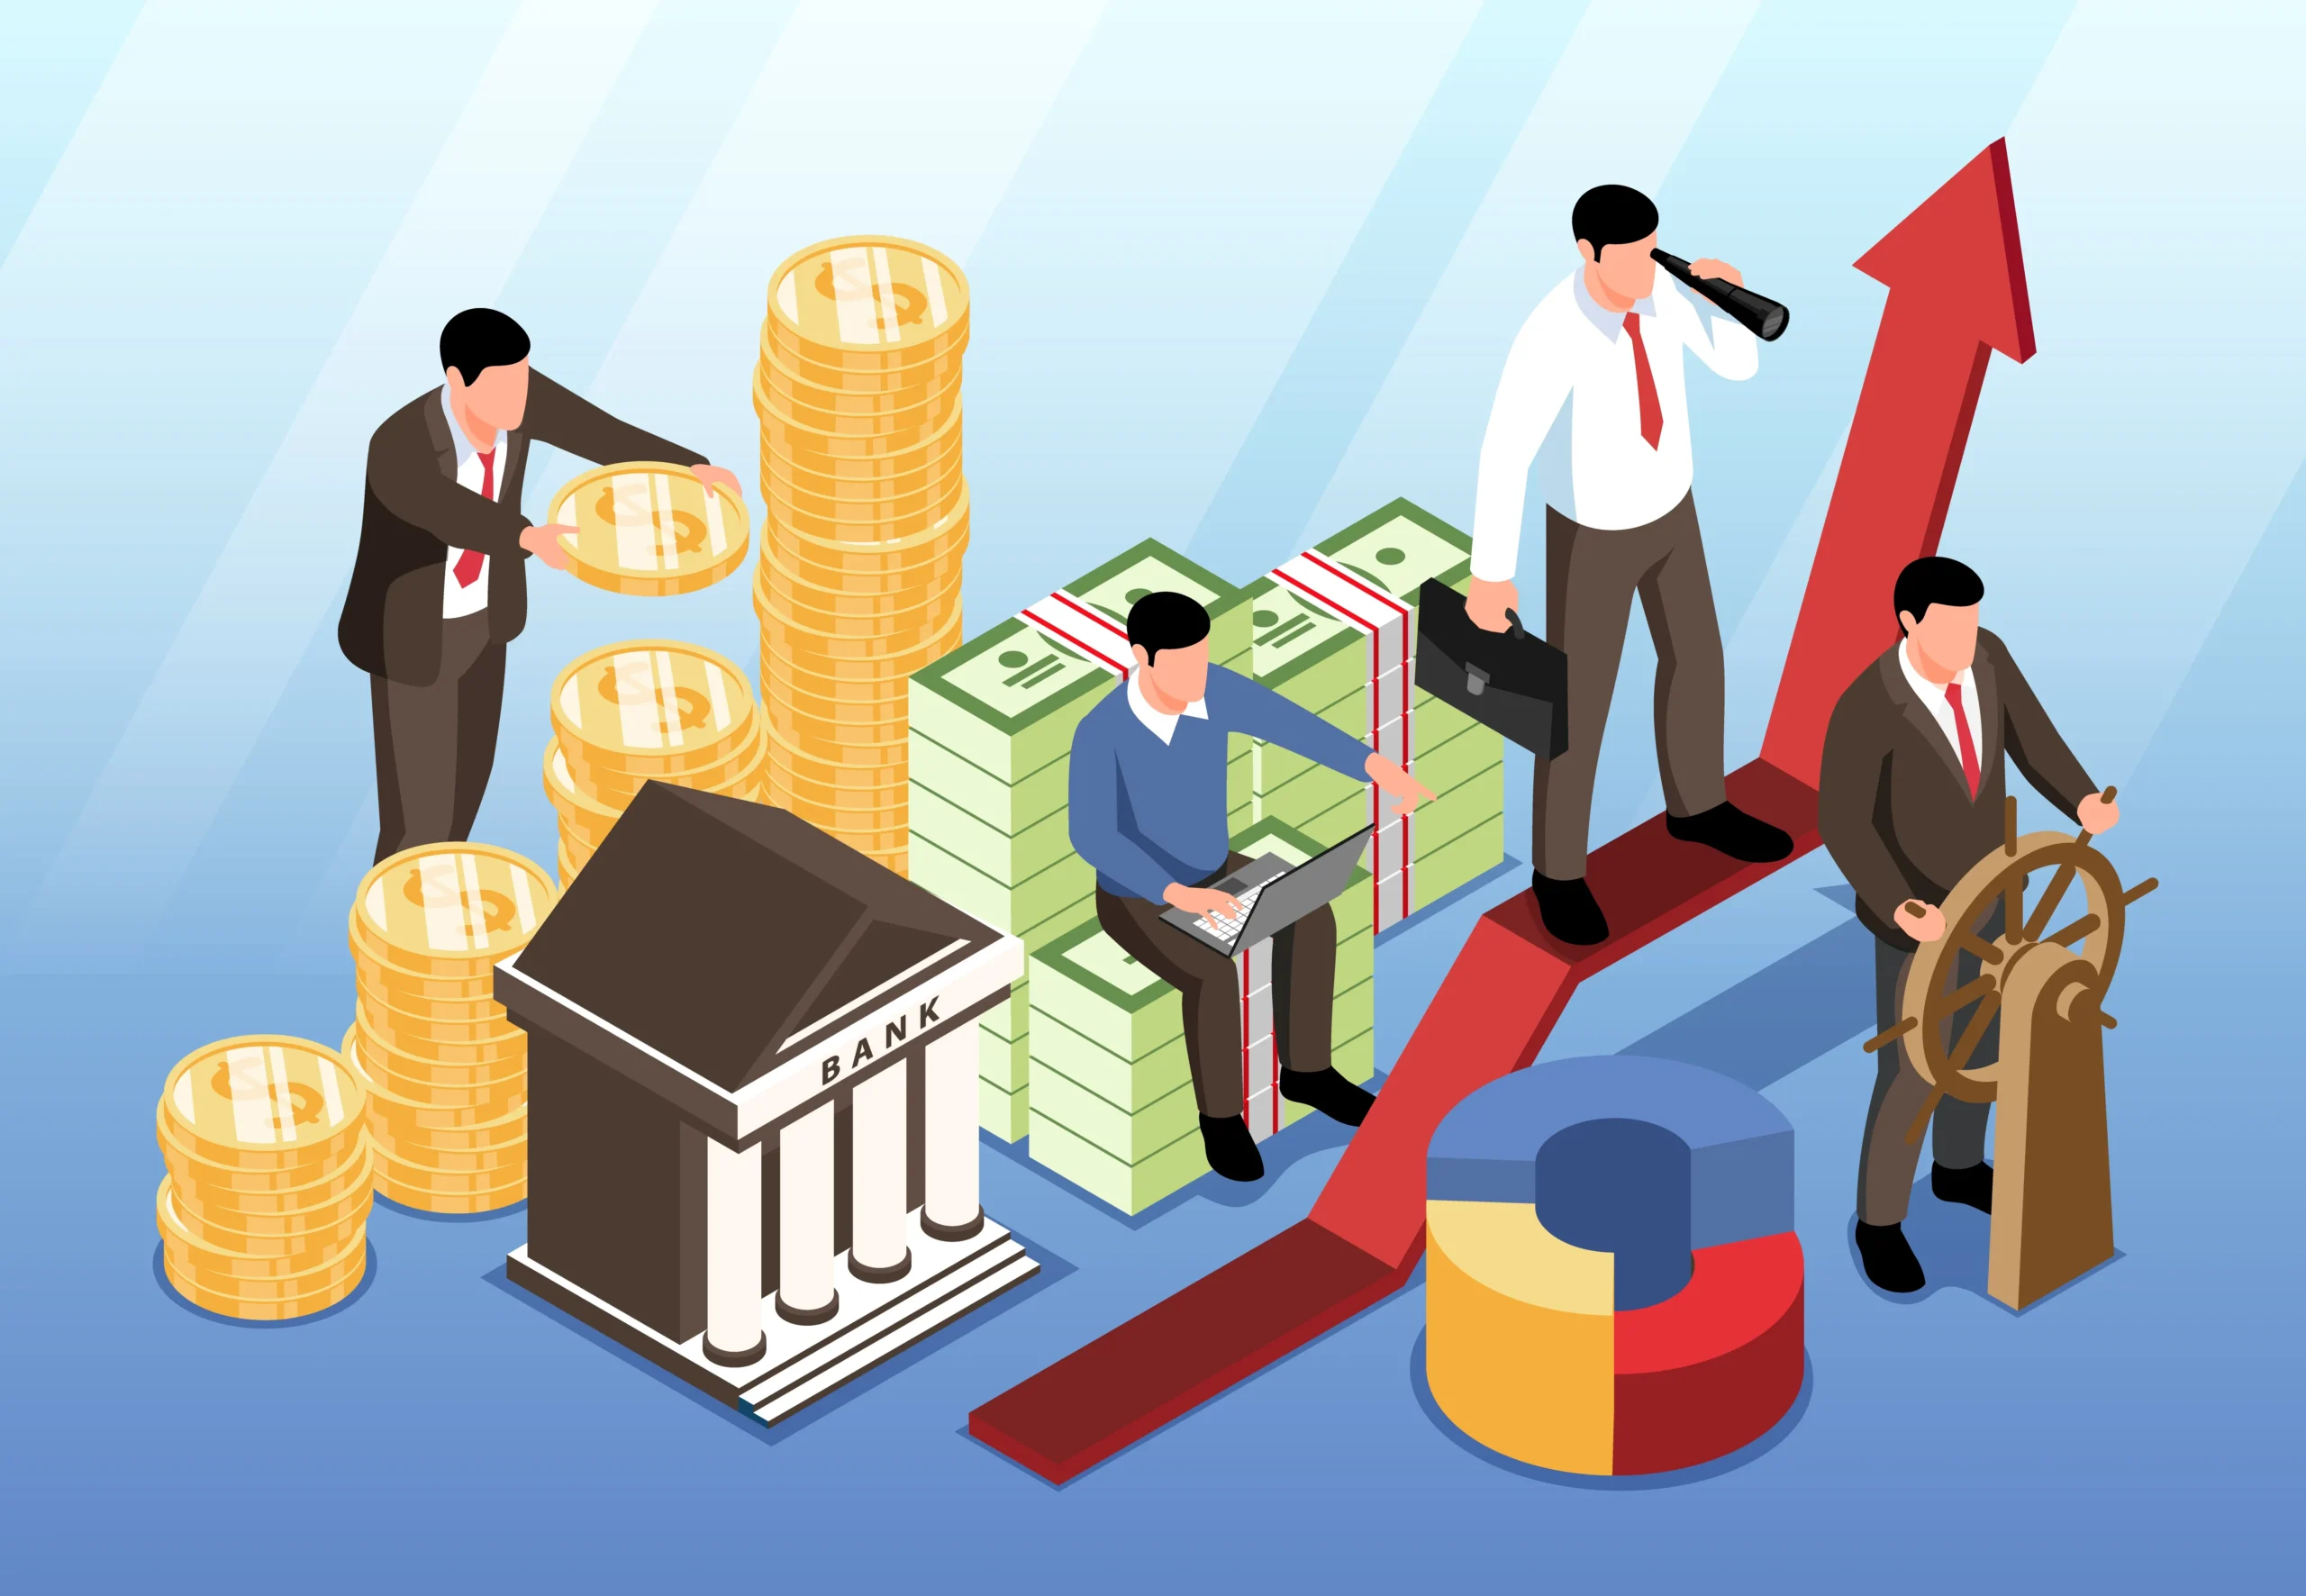 A stylized illustration showing four business figures with financial symbols such as coins, bank, money stacks, and a growth arrow, used by JOH Partners to depict exit opportunities and career progression in investment banking.